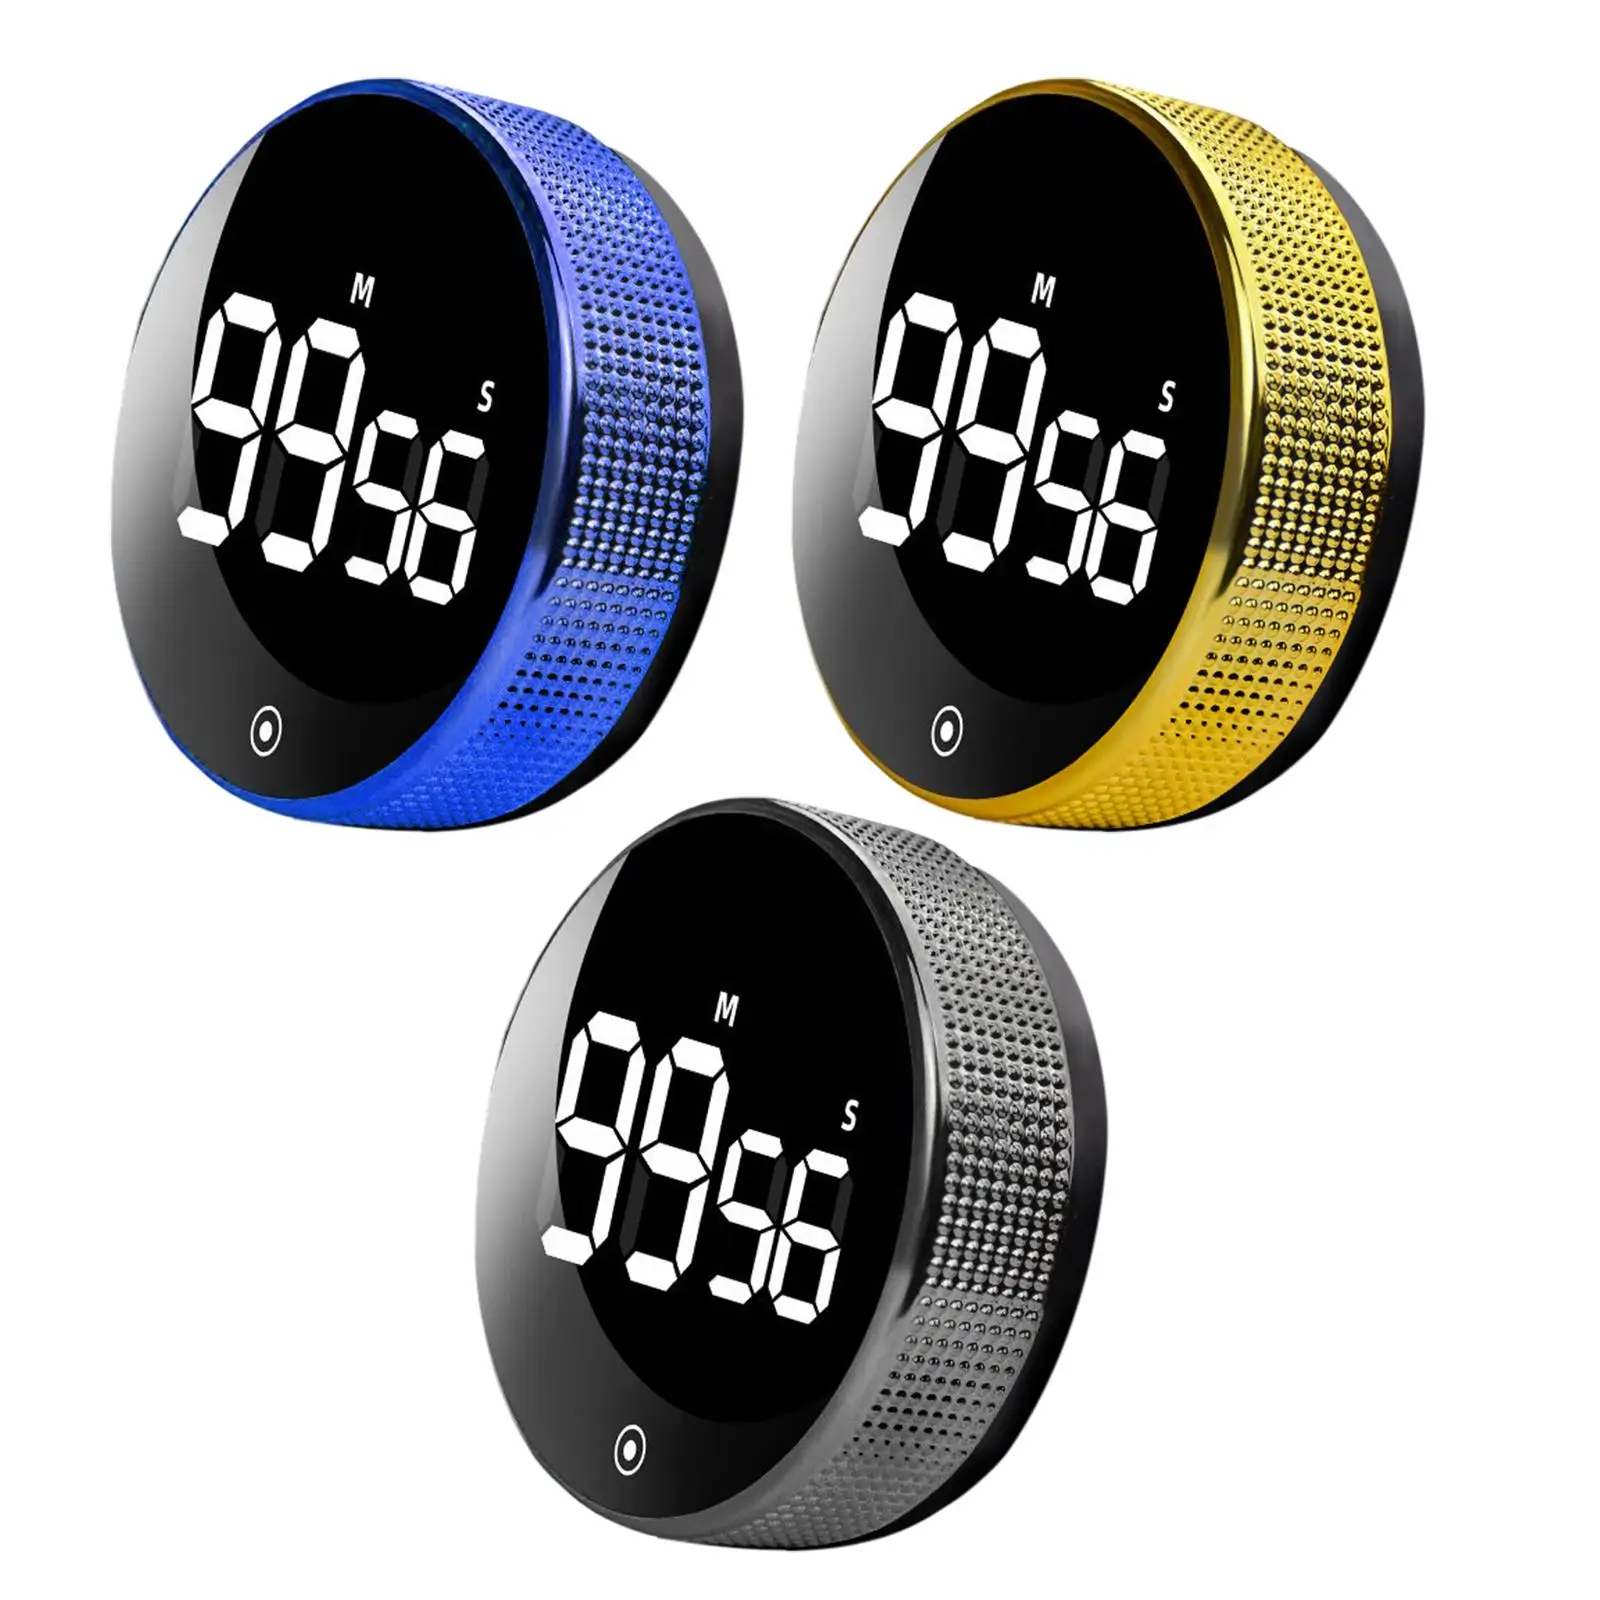 Digital Kitchen Timer Magnetic Attraction Count Down Battery Powered for Home Bathroom Cooking